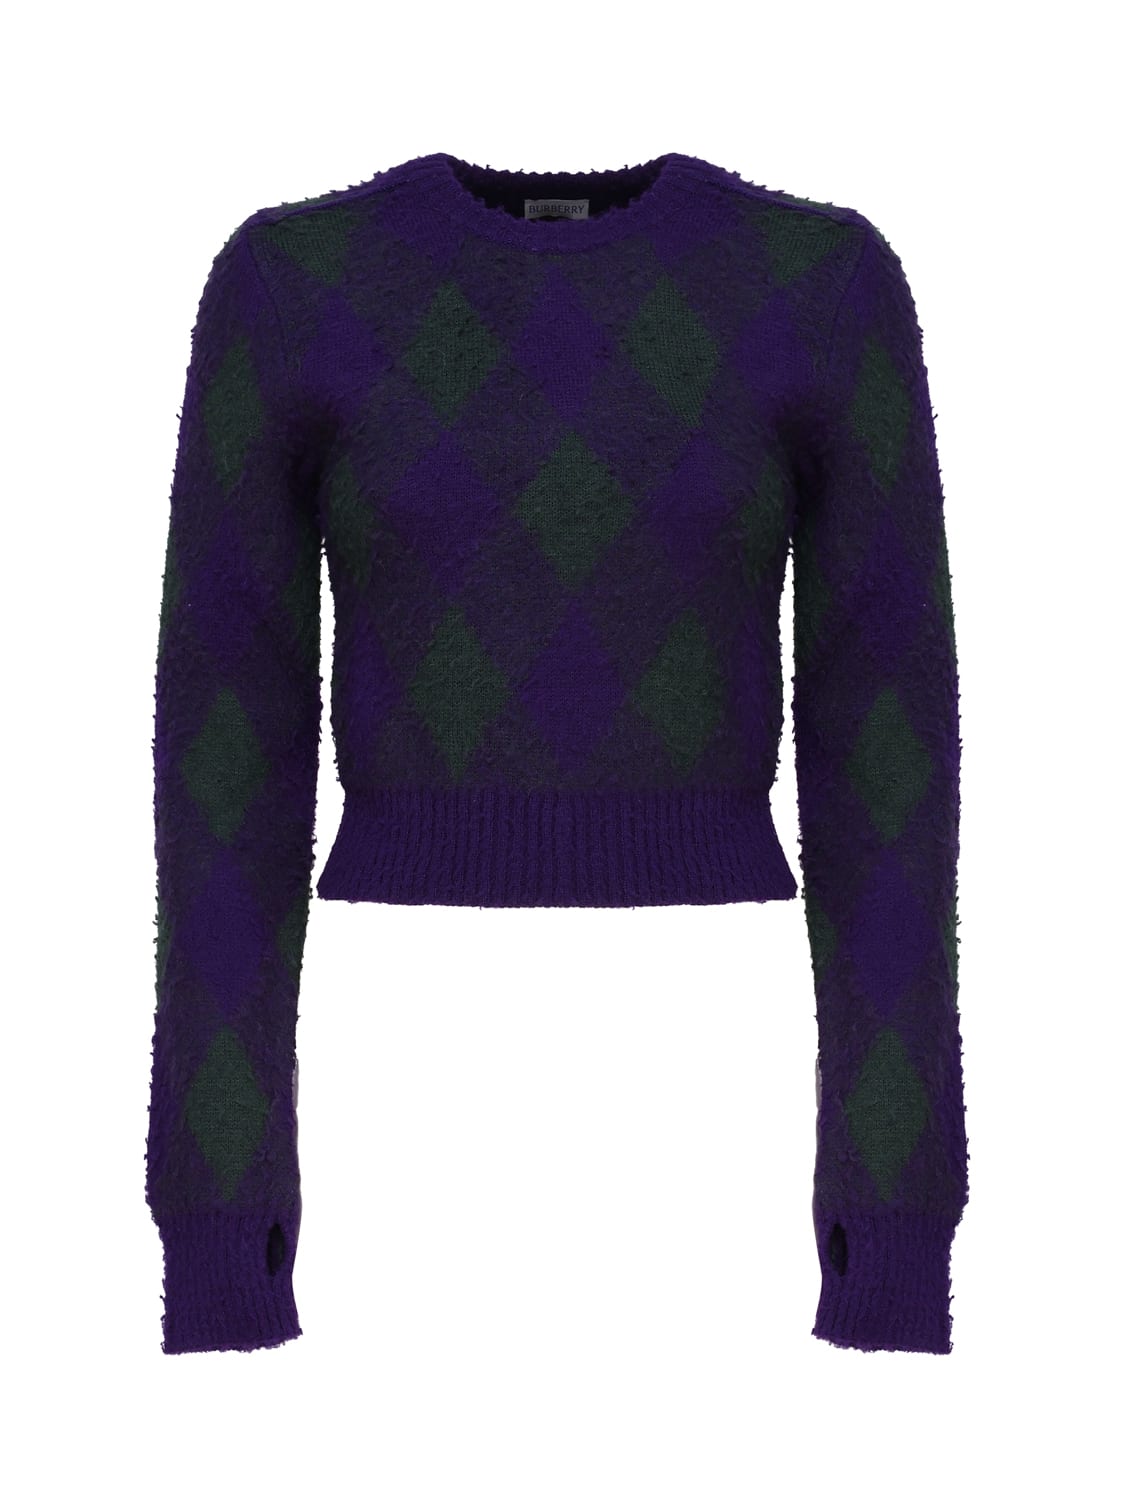 Burberry Cropped Sweater In Argyle Wool In Purple